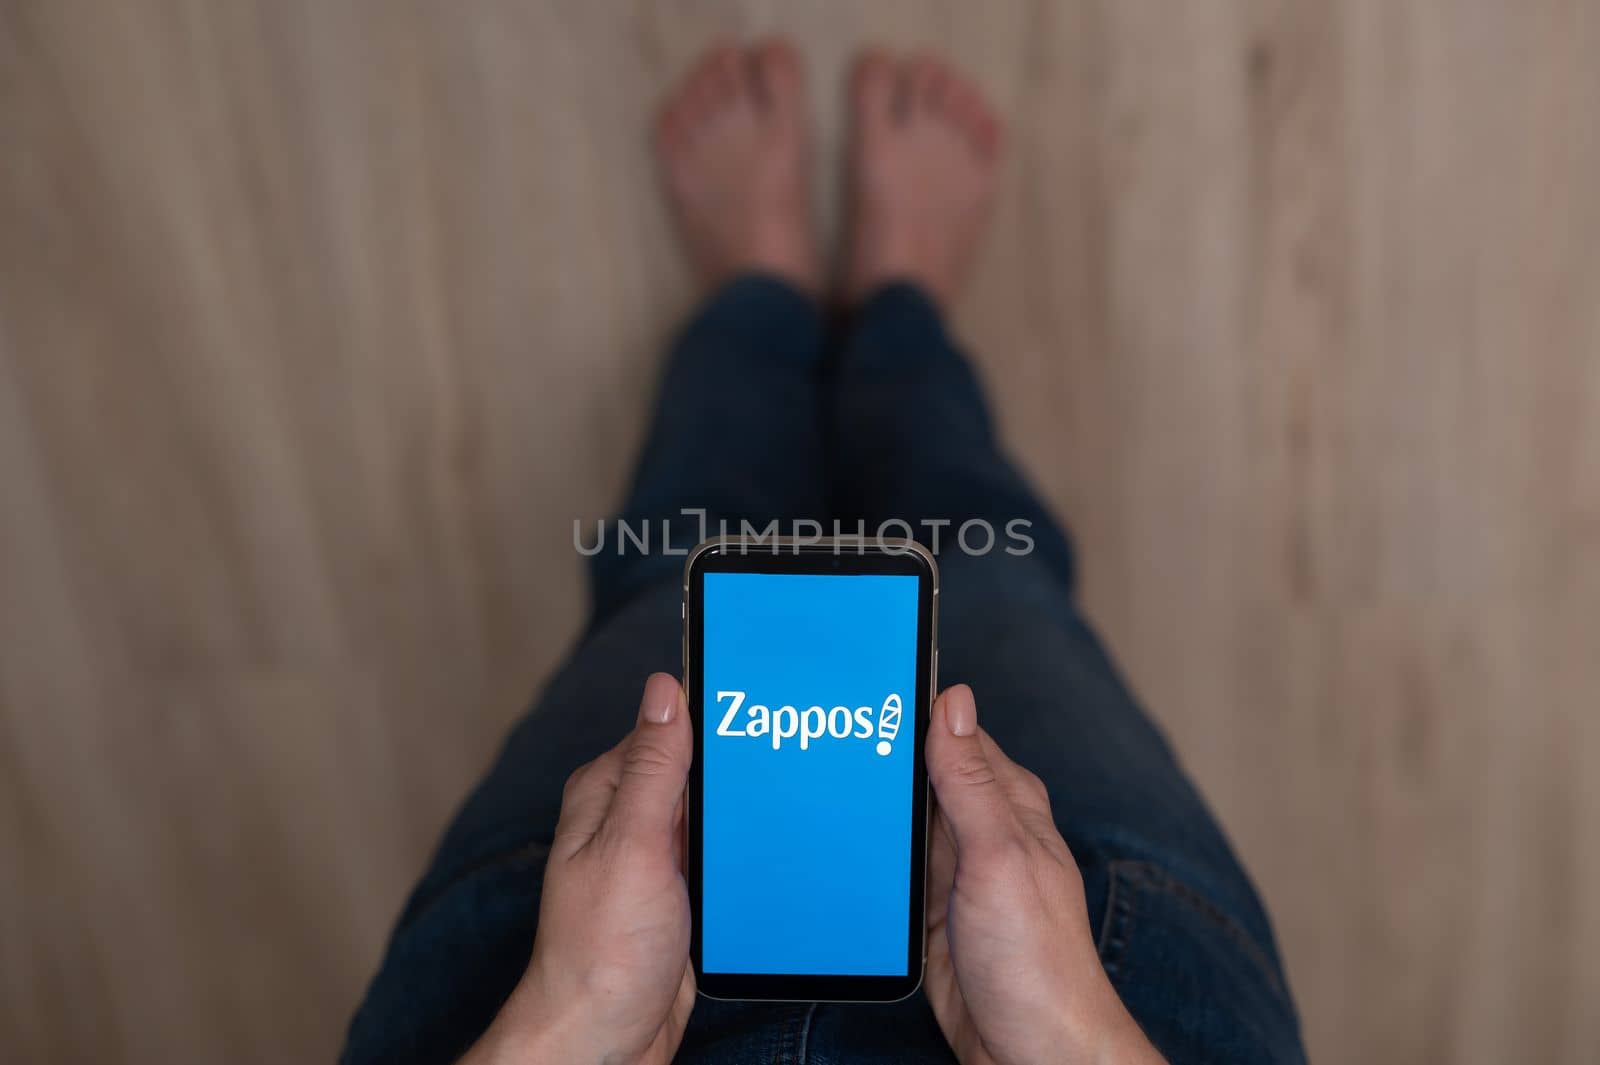 December 3, 2022 Almaty Kazakhstan: Barefoot woman holding smartphone with zappos logo. by mrwed54